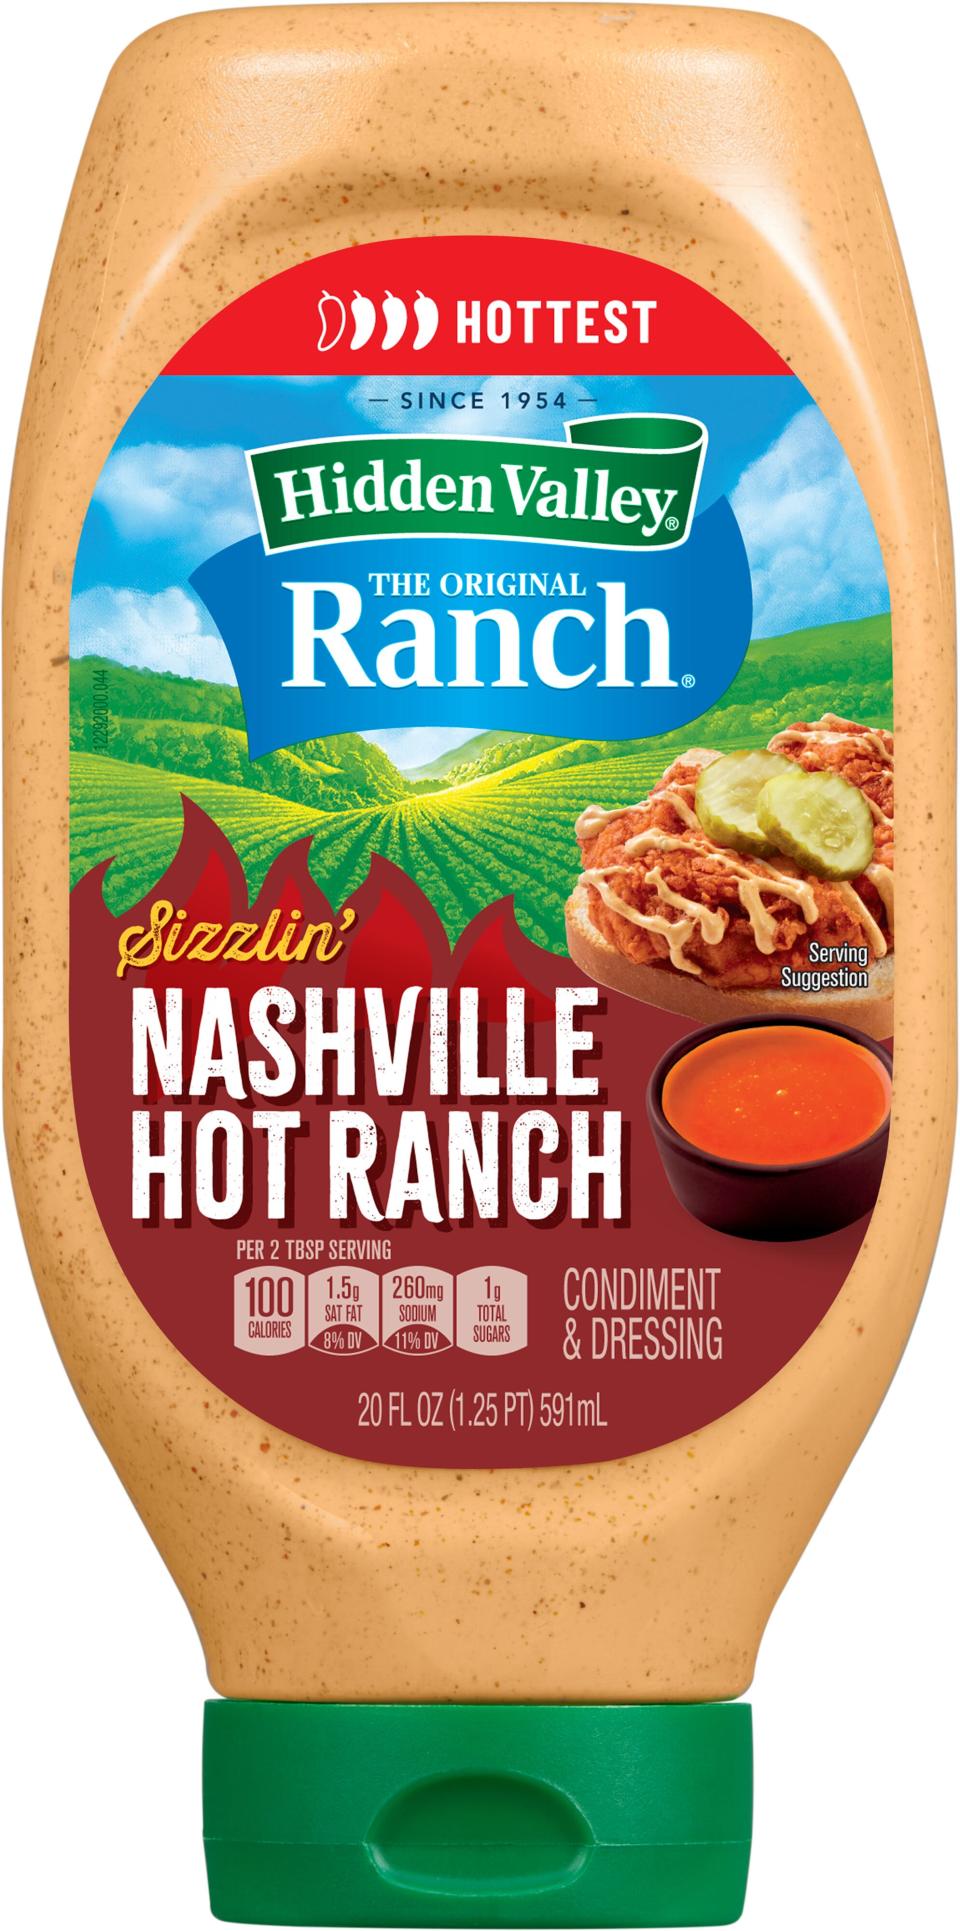 In addition to Cheezy Ranch, Hidden Valley Ranch is launching six additional new flavors this spring, including a Nashville Hot Ranch.